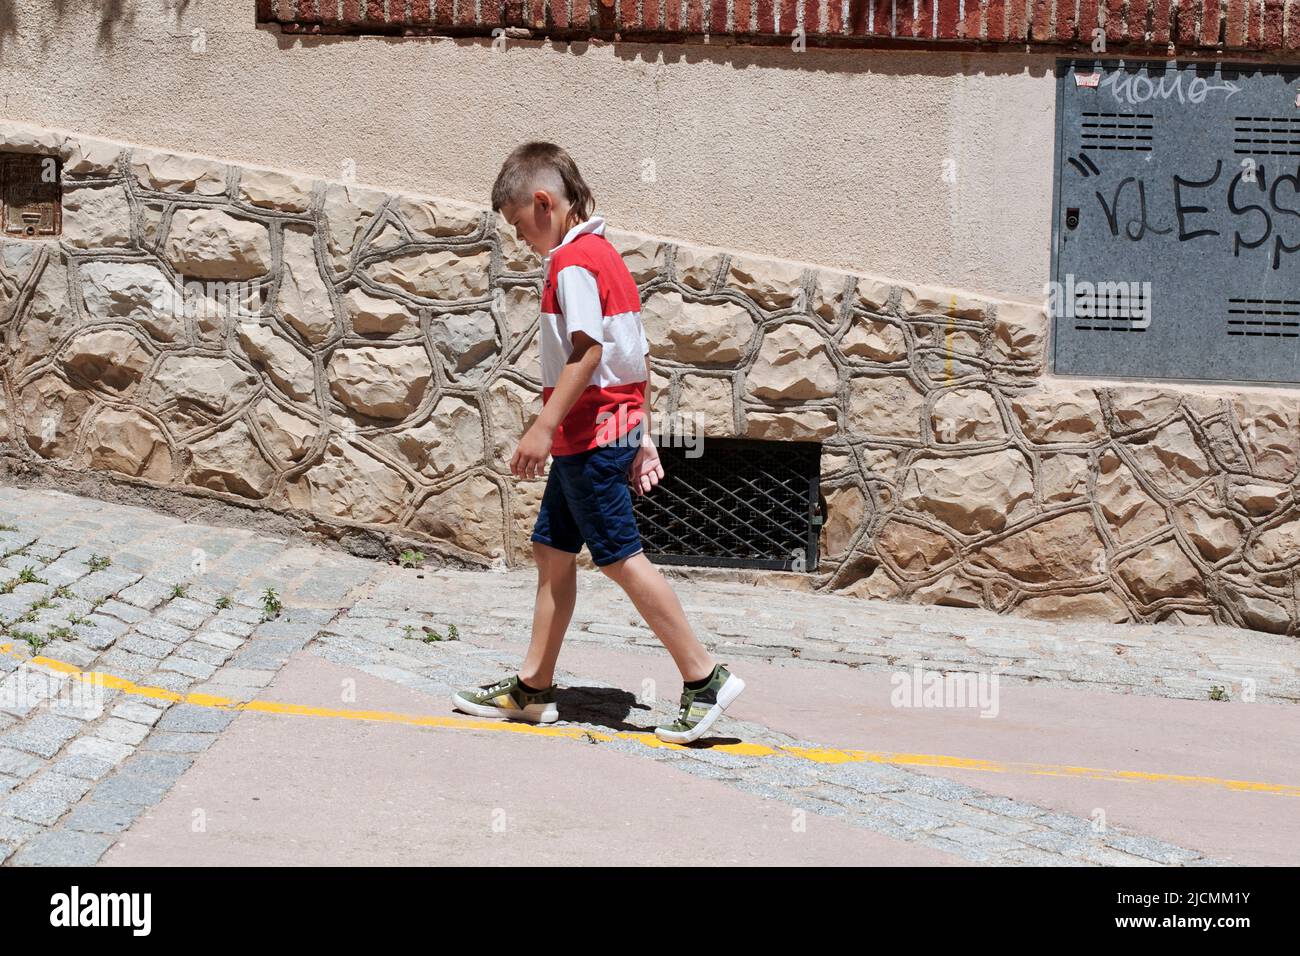 Boy with mullet, Alforja, Spain. Stock Photo